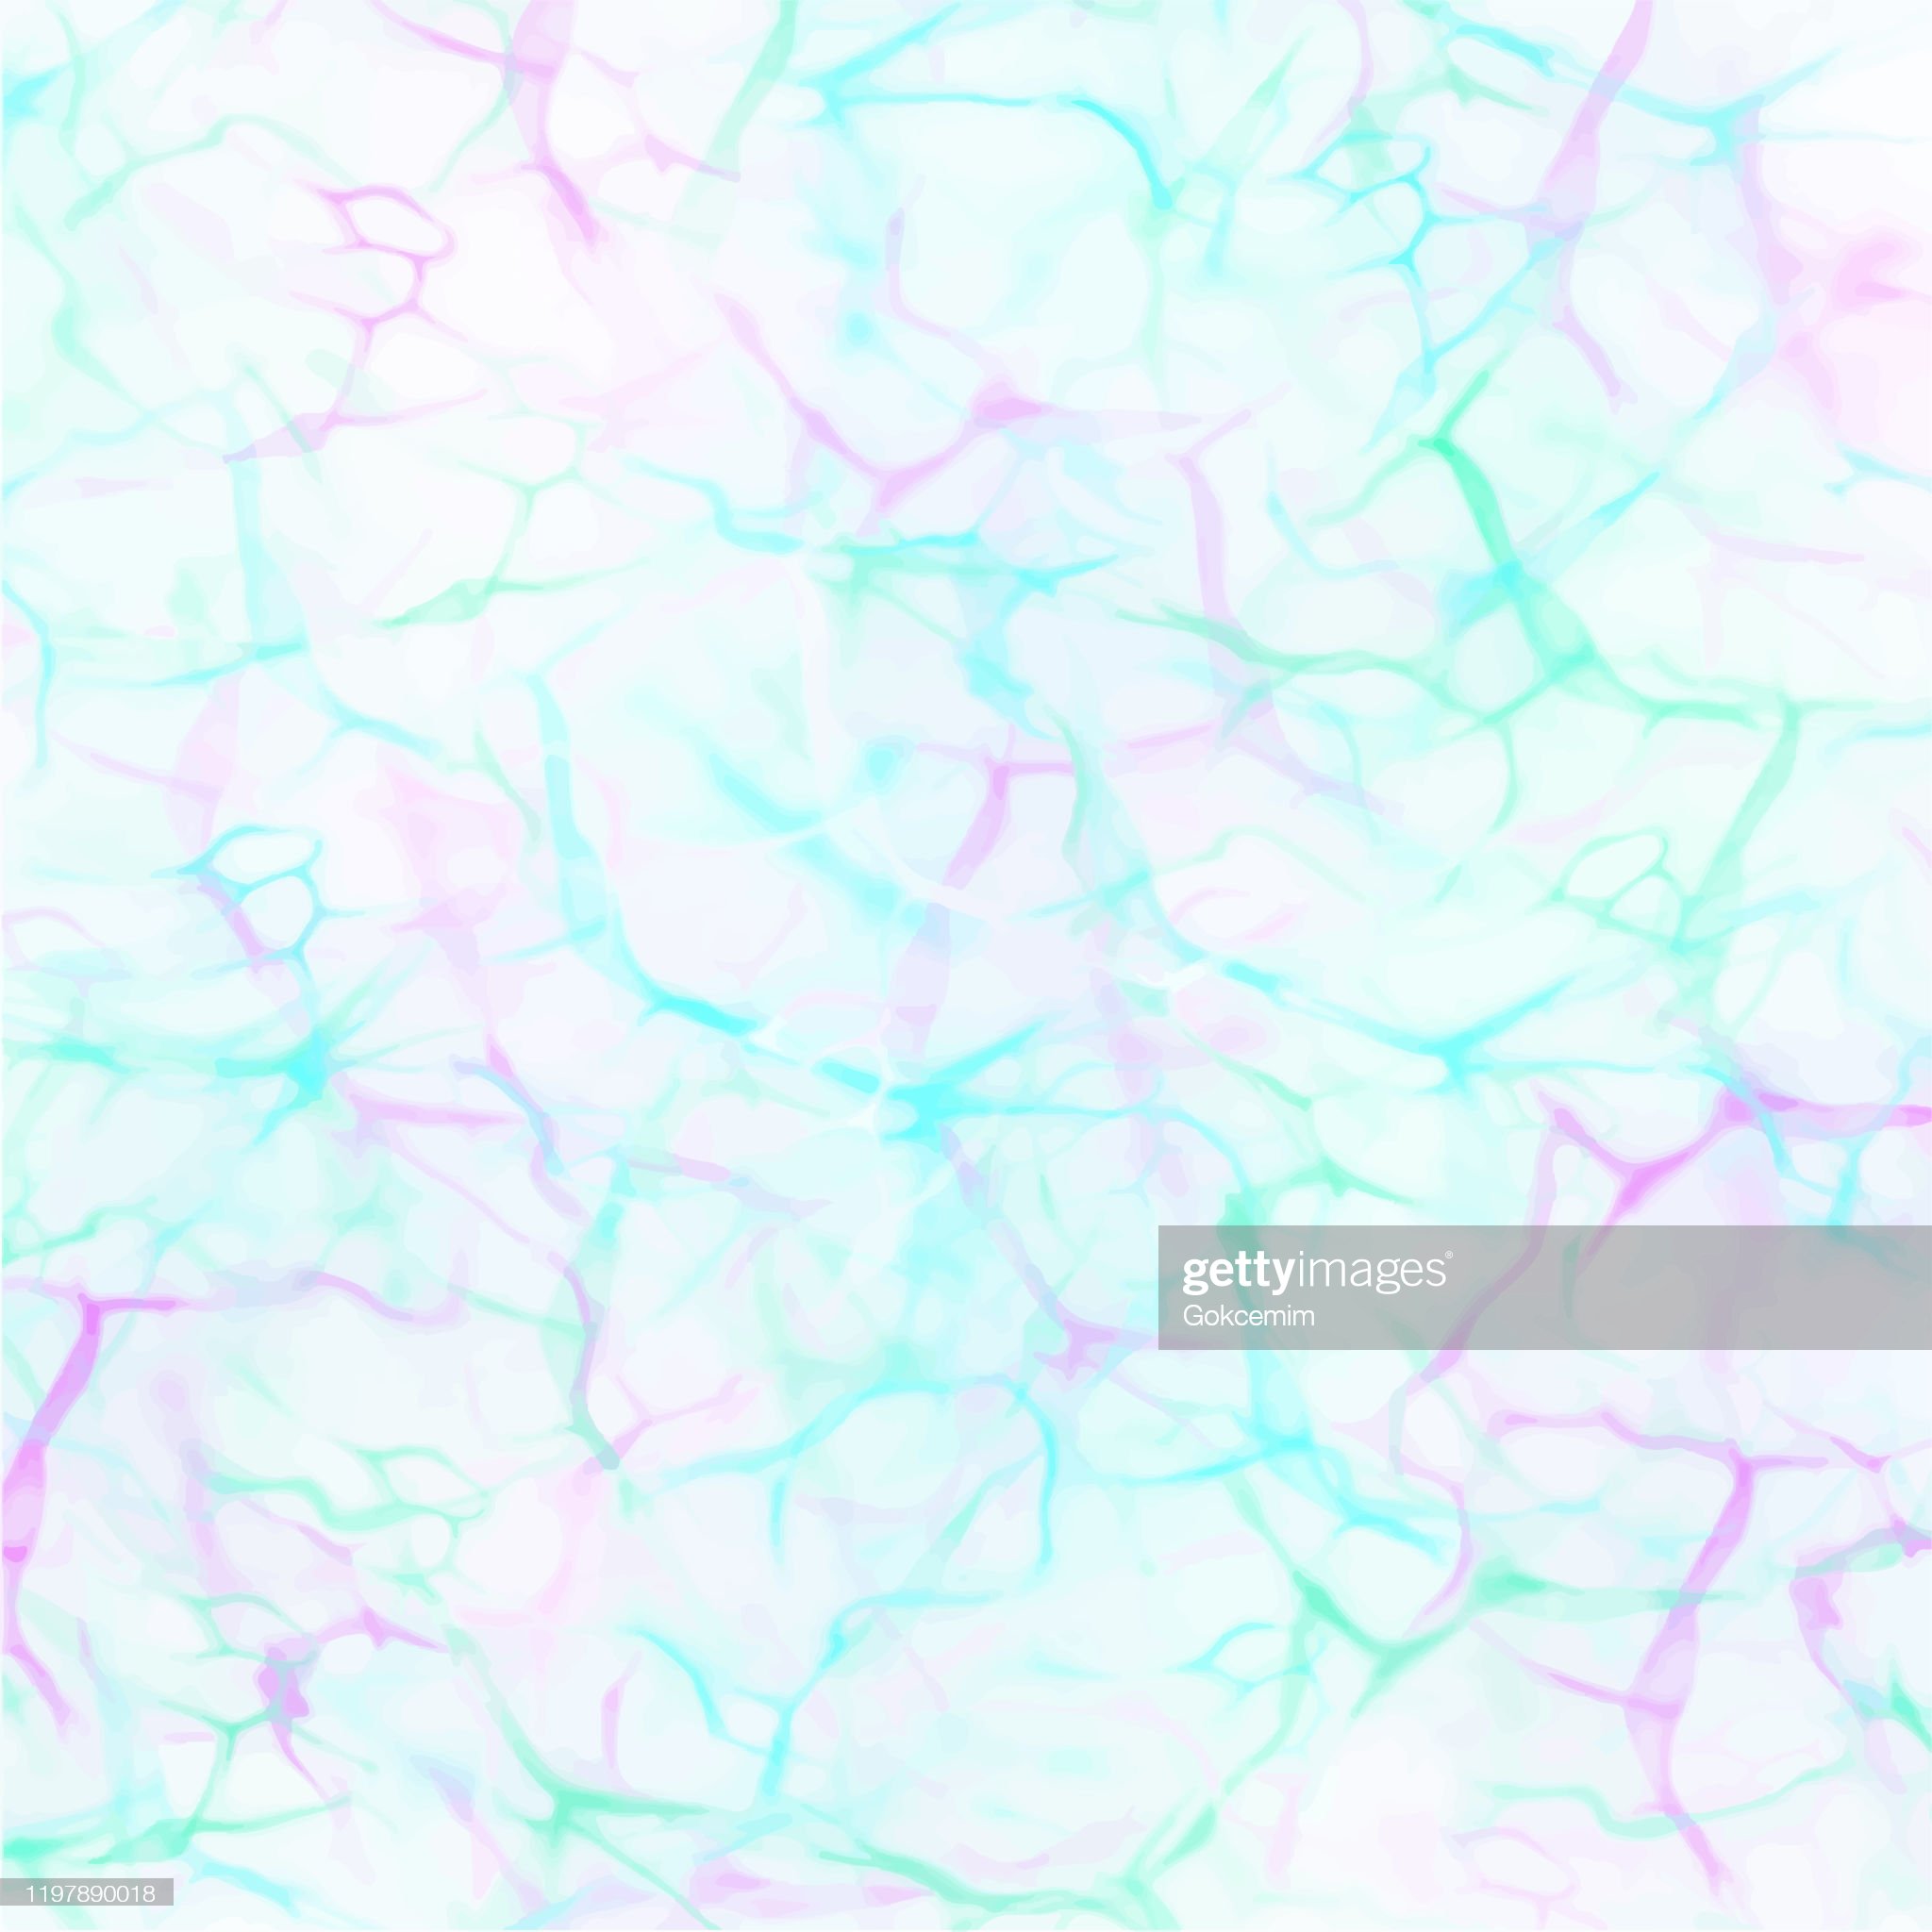 Turquoise Blue Pink And Puple Colored Marble Texture Vector